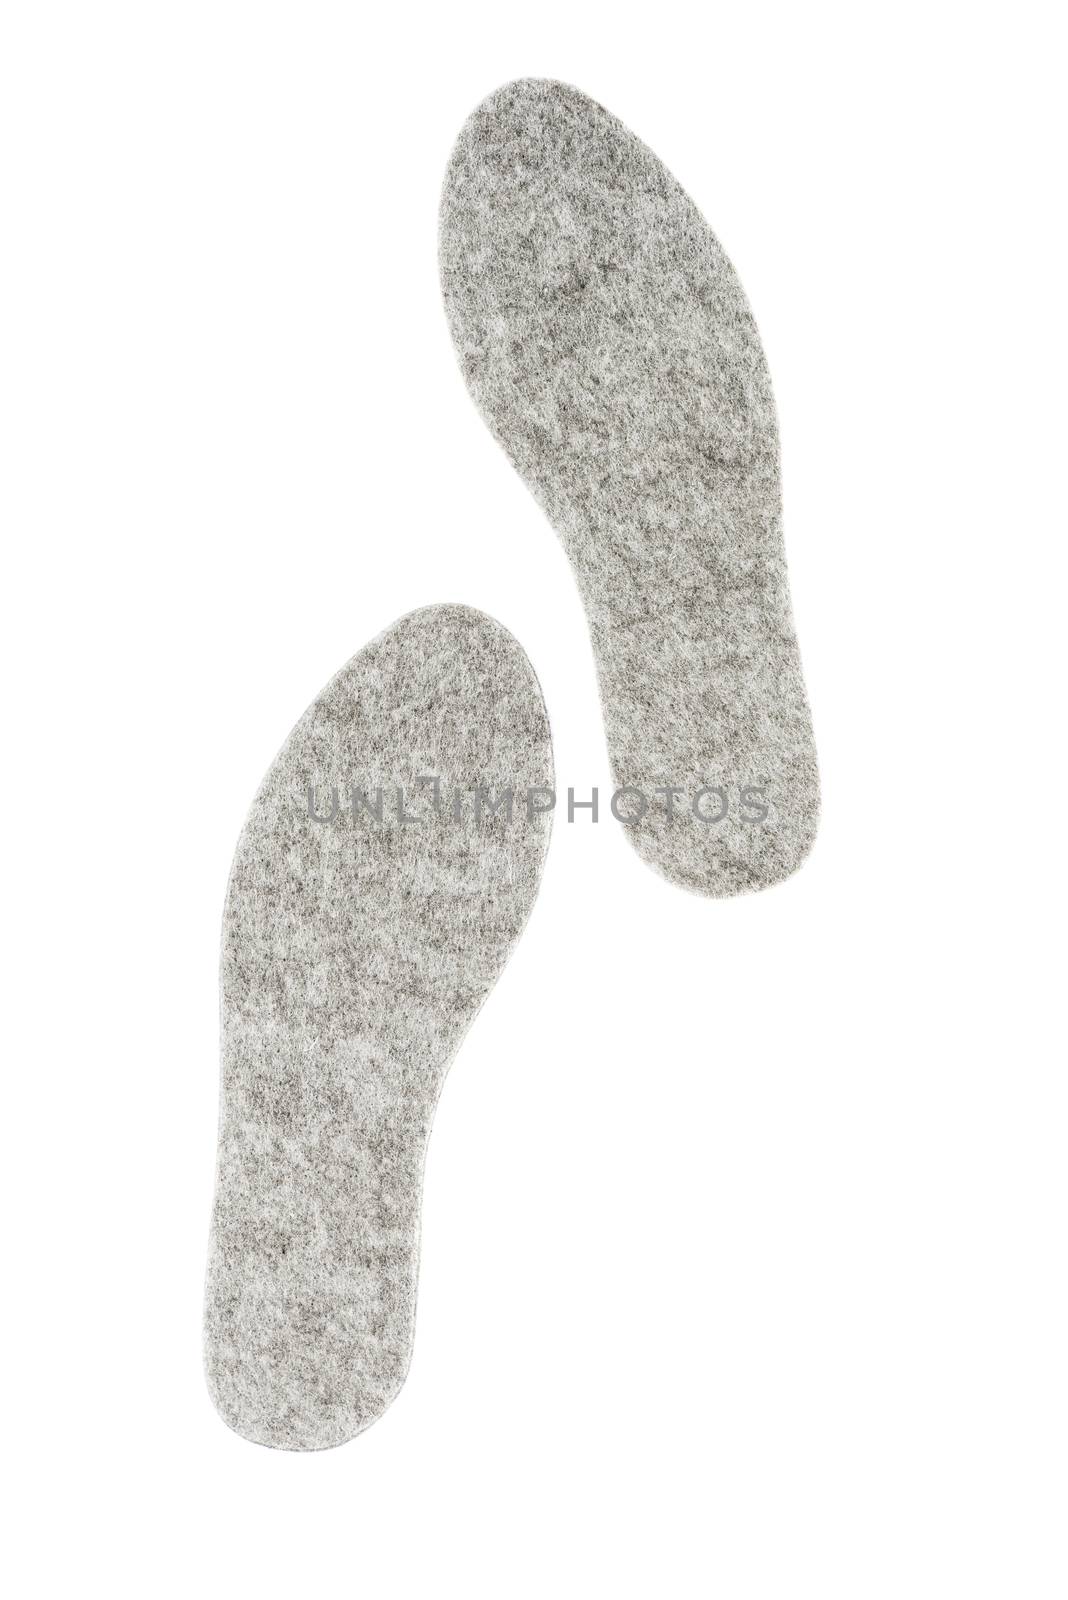 Pair of felt insoles isolated on white background